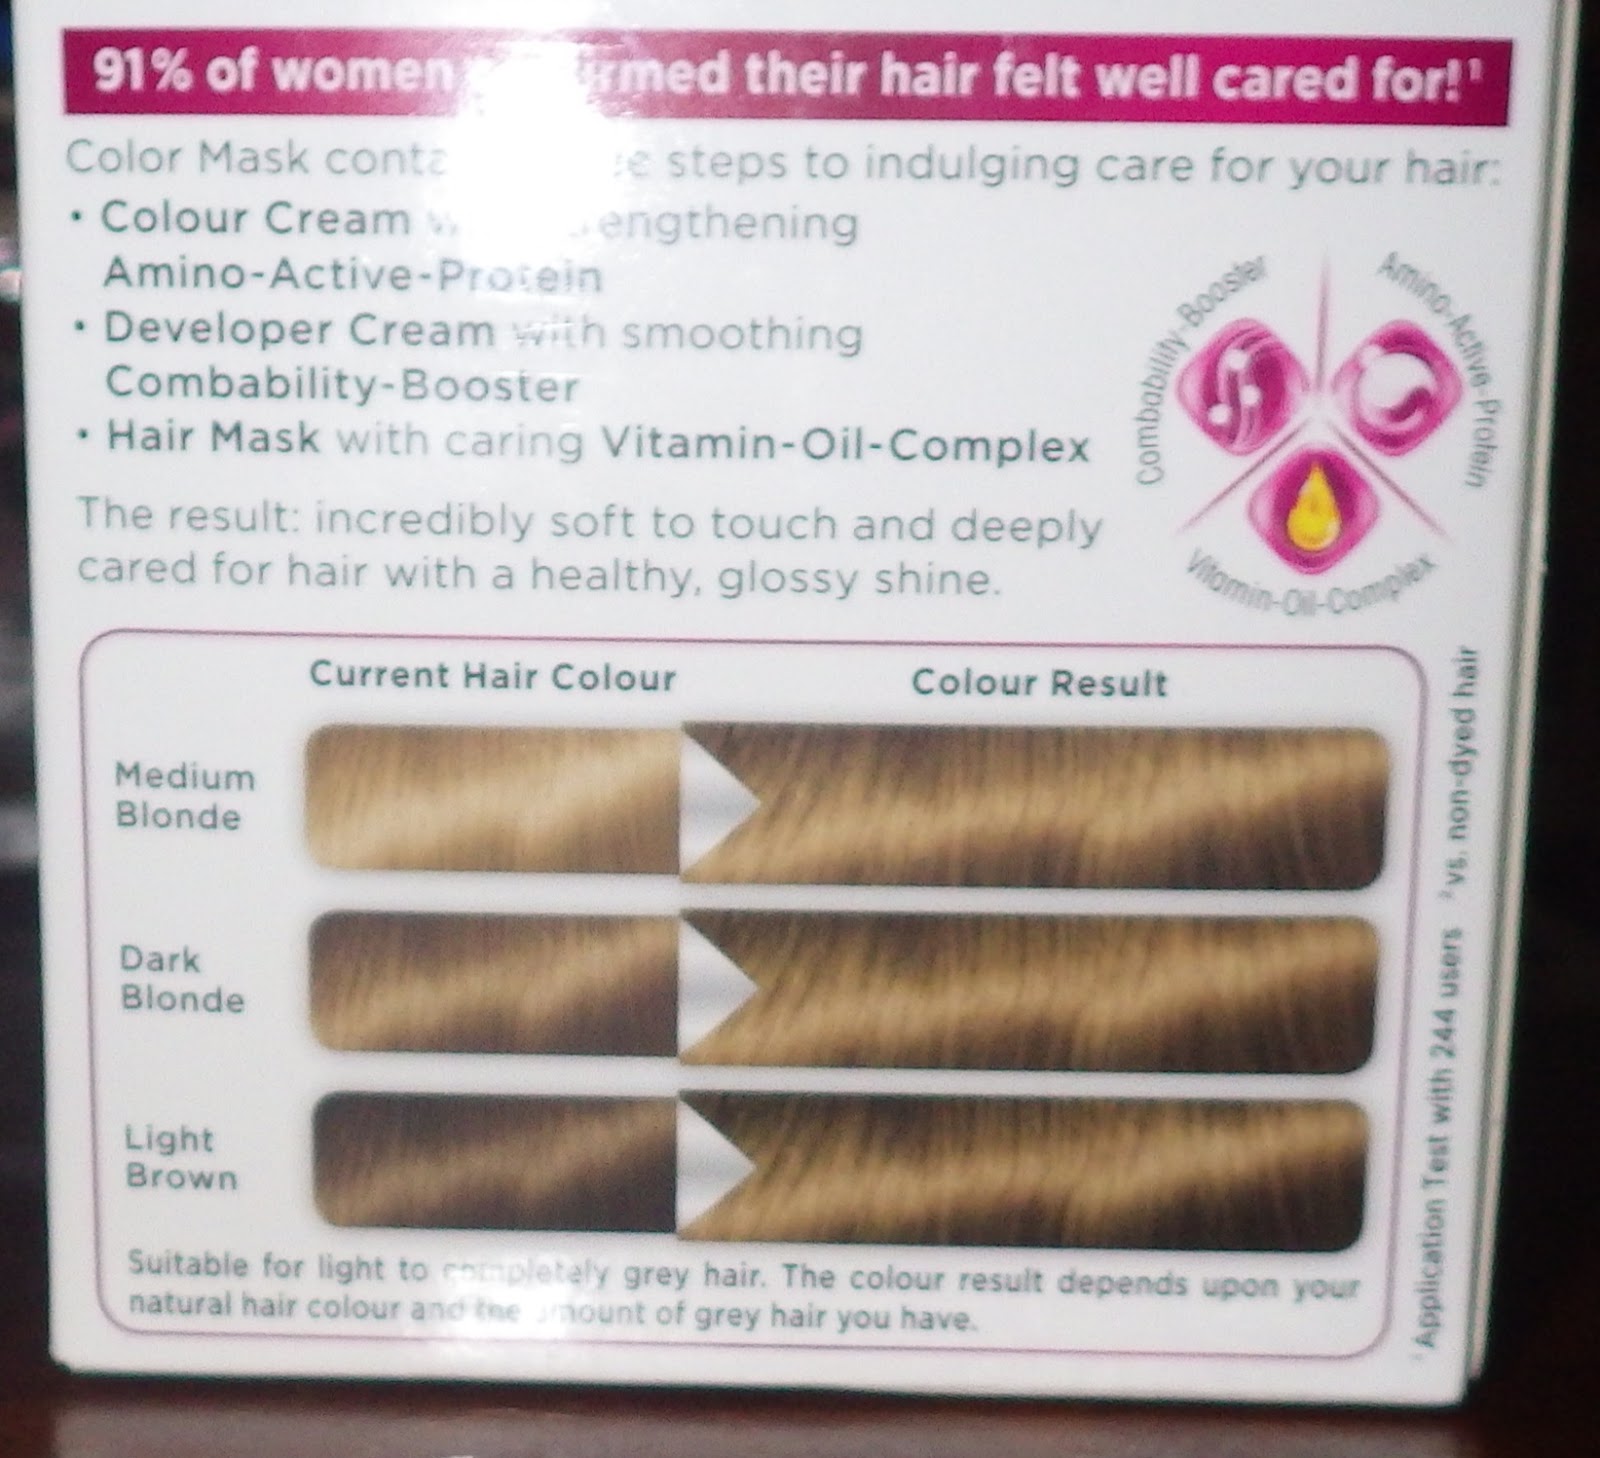 Brown Hair Color Schwarzkopf Hair Color Highlighting And